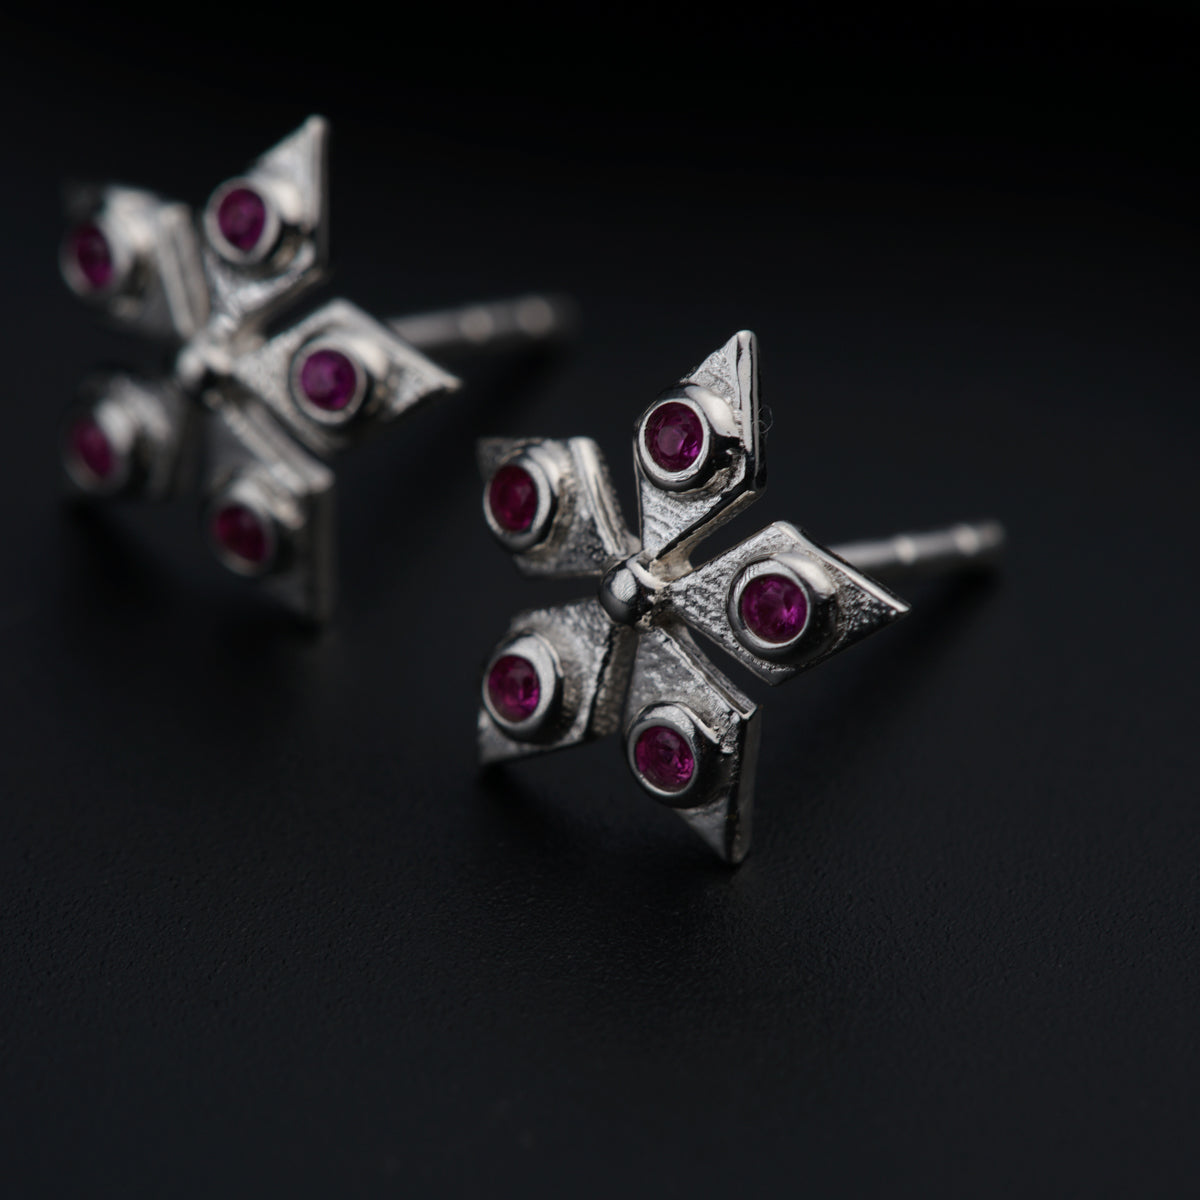 a pair of silver and ruby earrings on a black surface